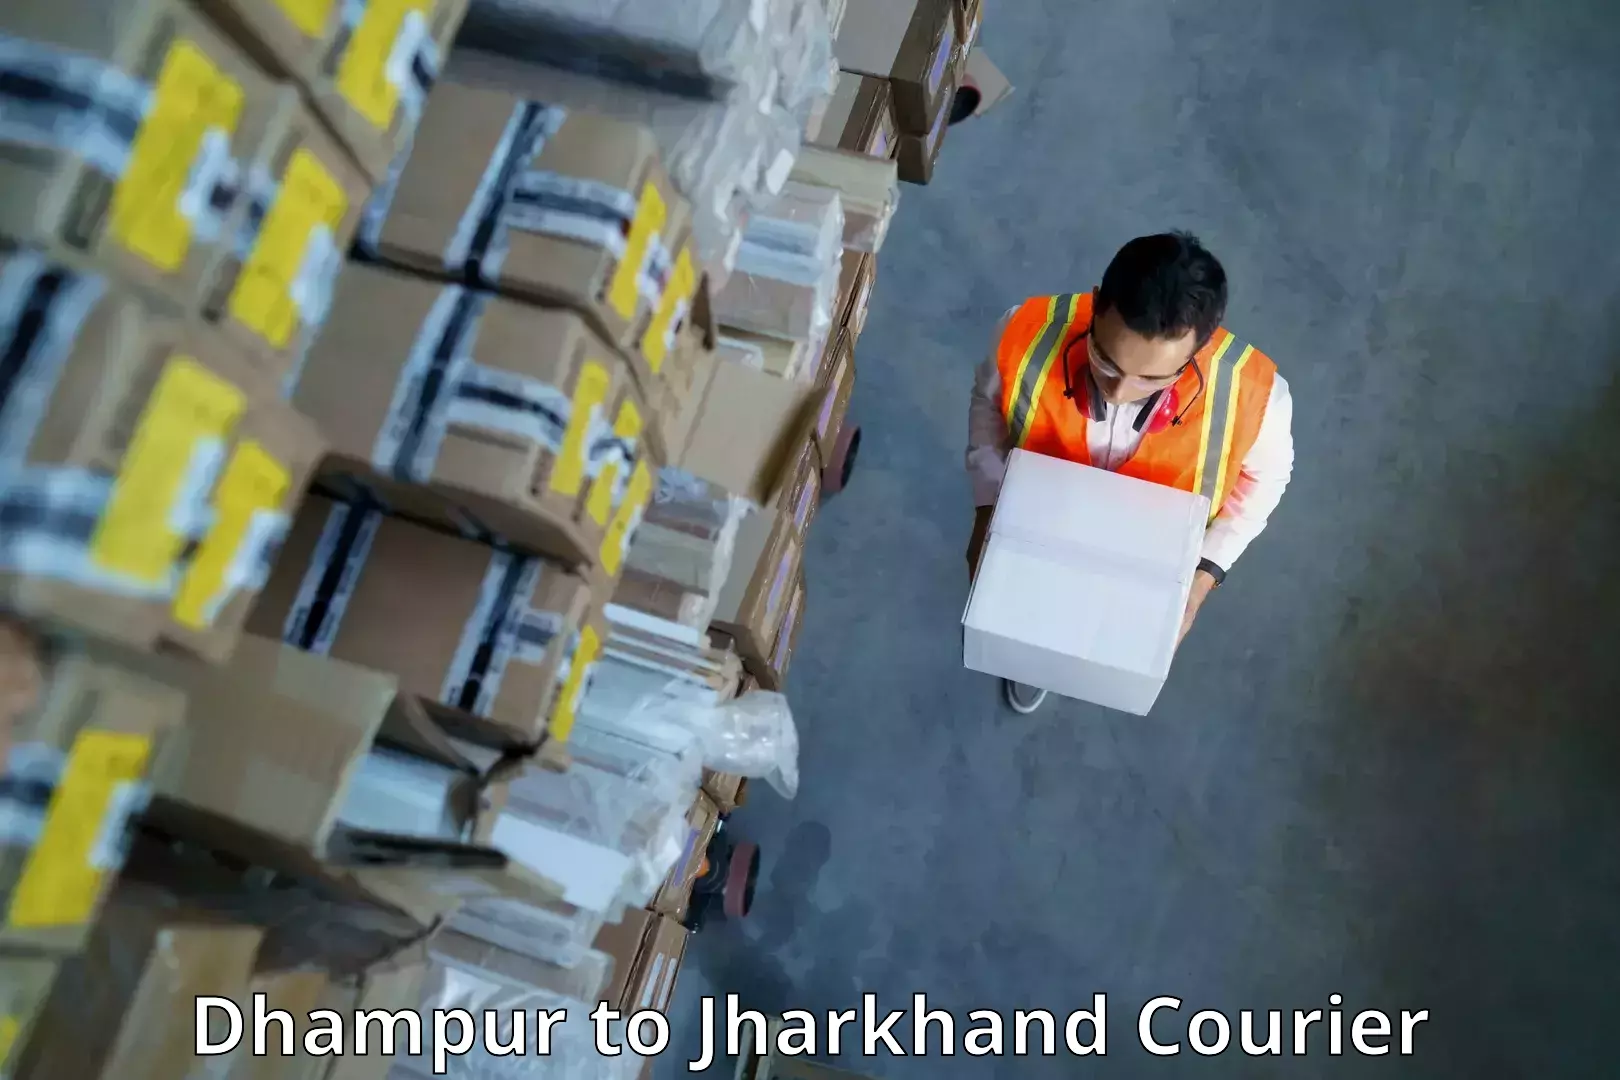 Global shipping solutions Dhampur to Hazaribagh